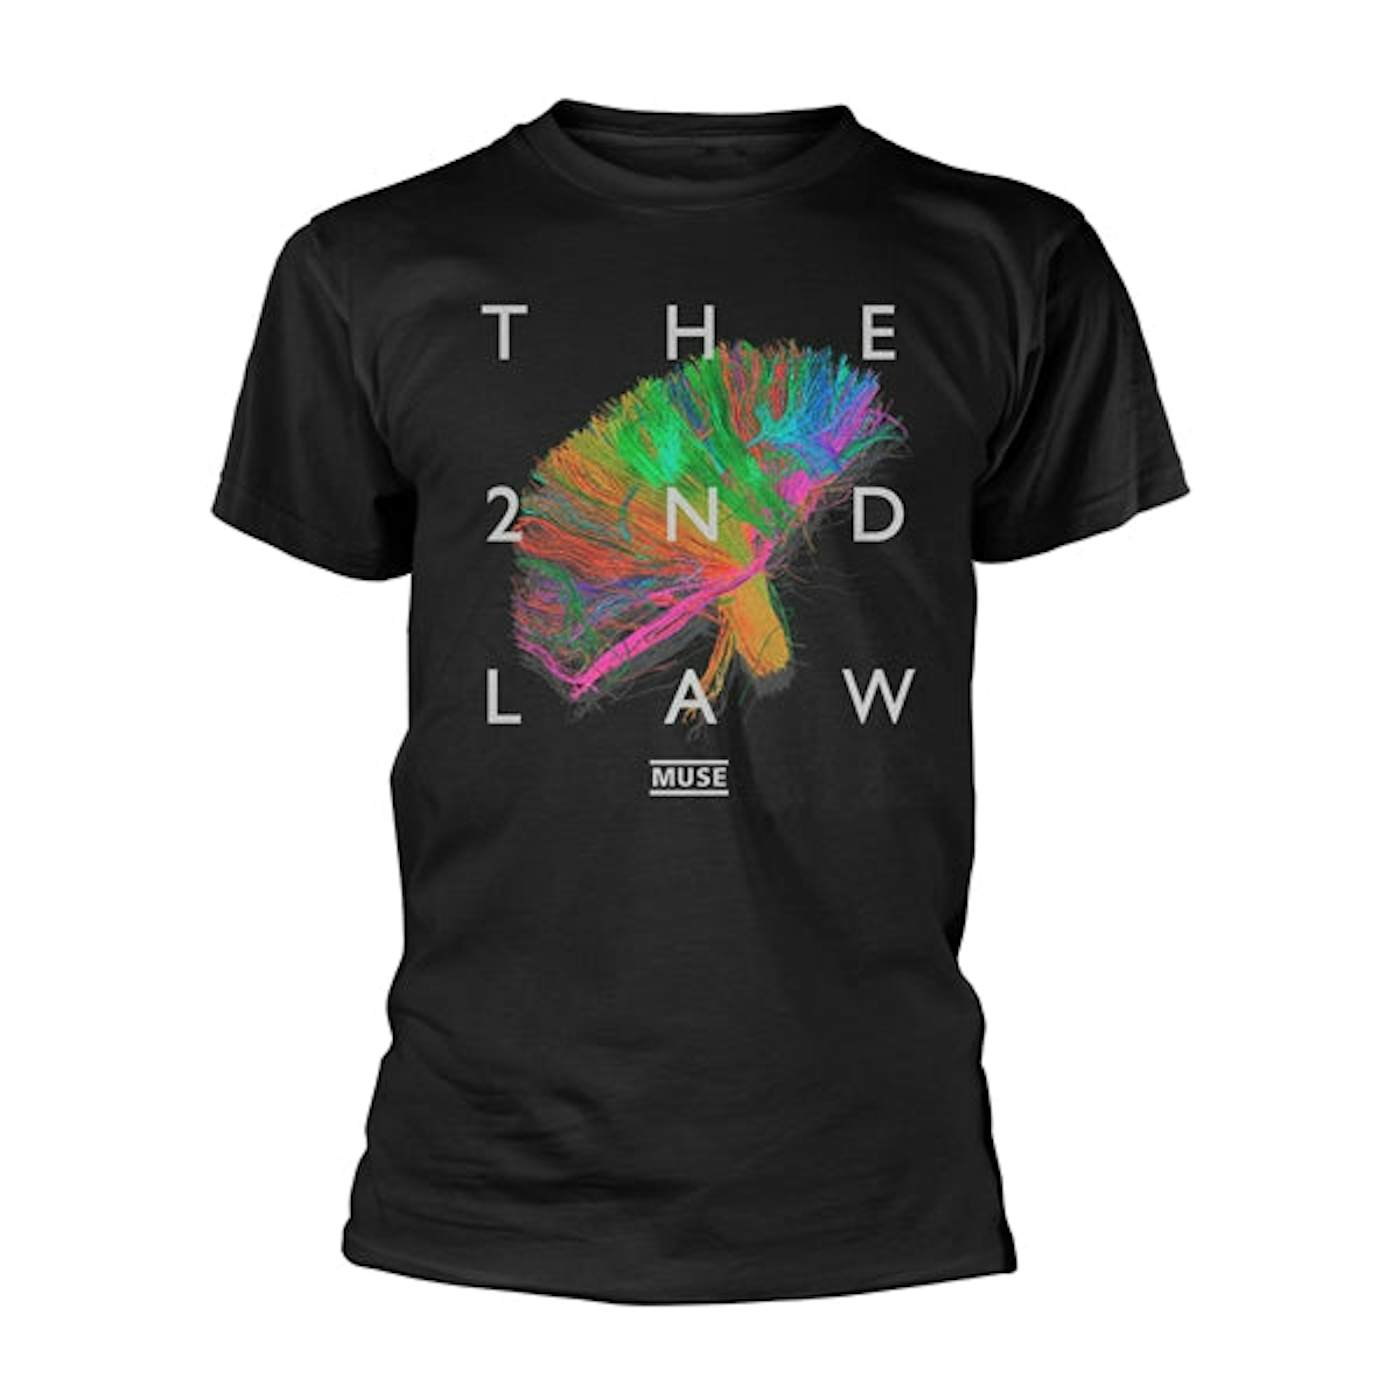 Muse T Shirt - The 2nd Law